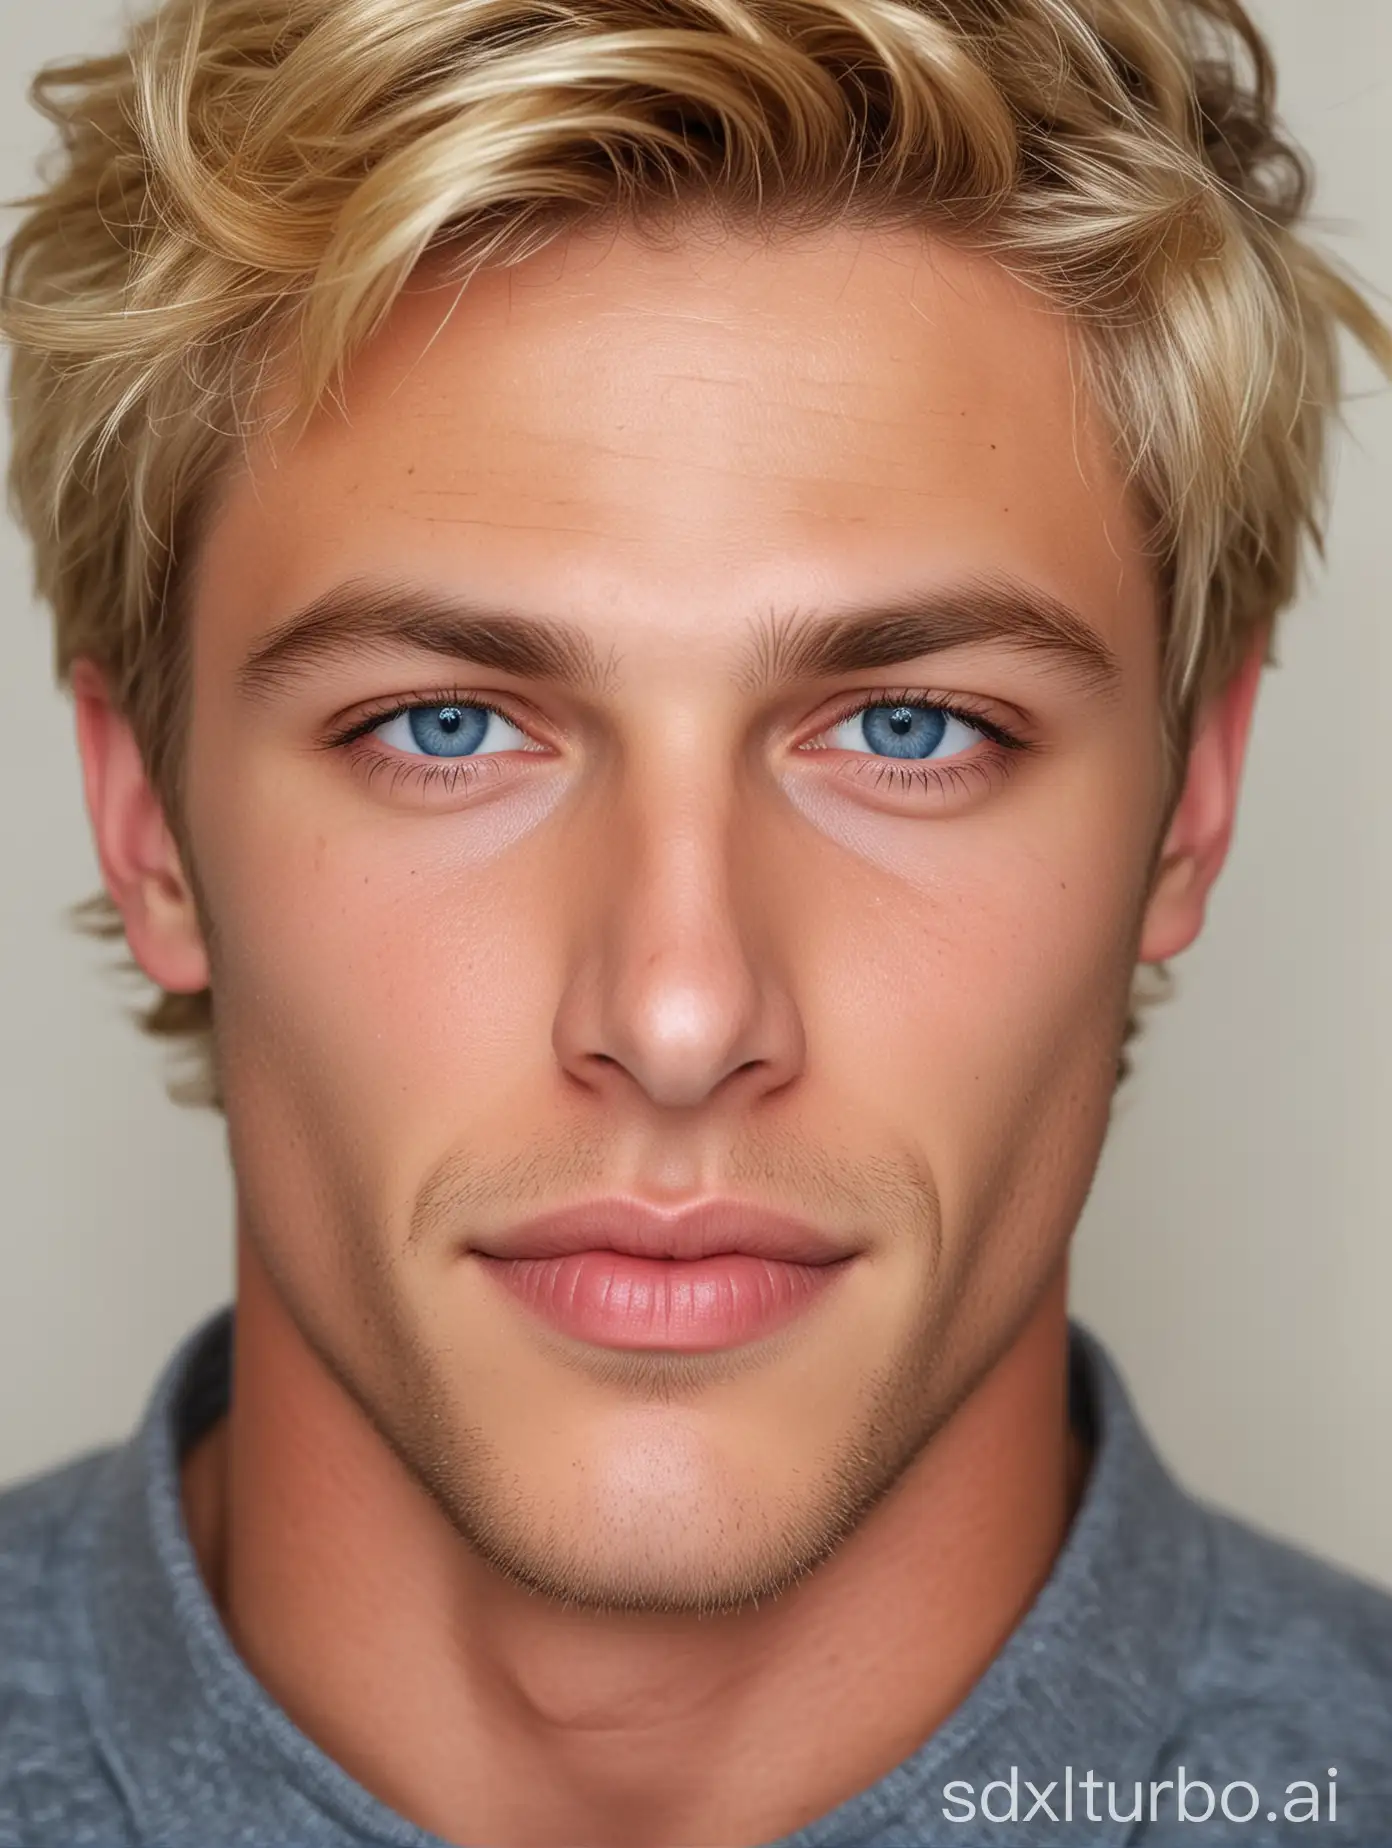 Blonde-Adonis-with-a-Joyful-Expression-and-Sensual-Lips